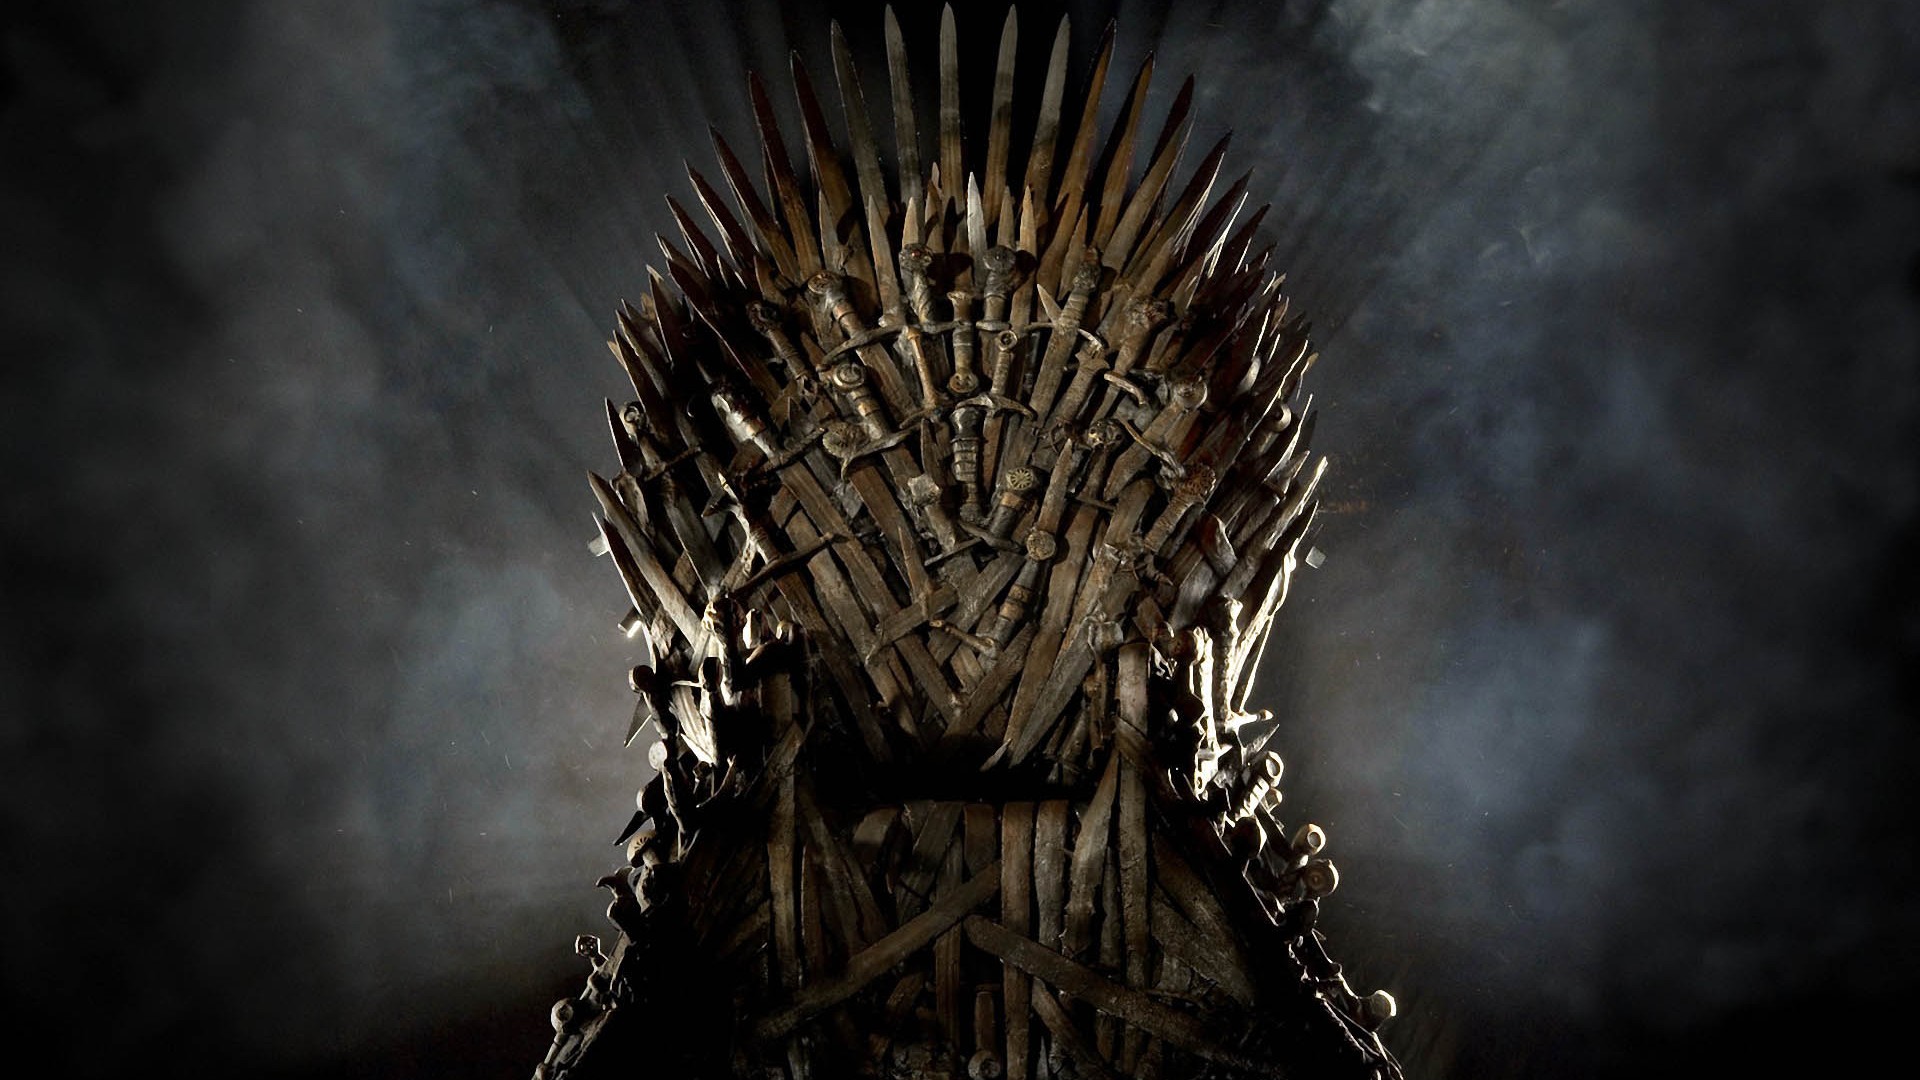 Game of Thrones Iron Throne Wallpaper   HD Wallpapers 1920x1080